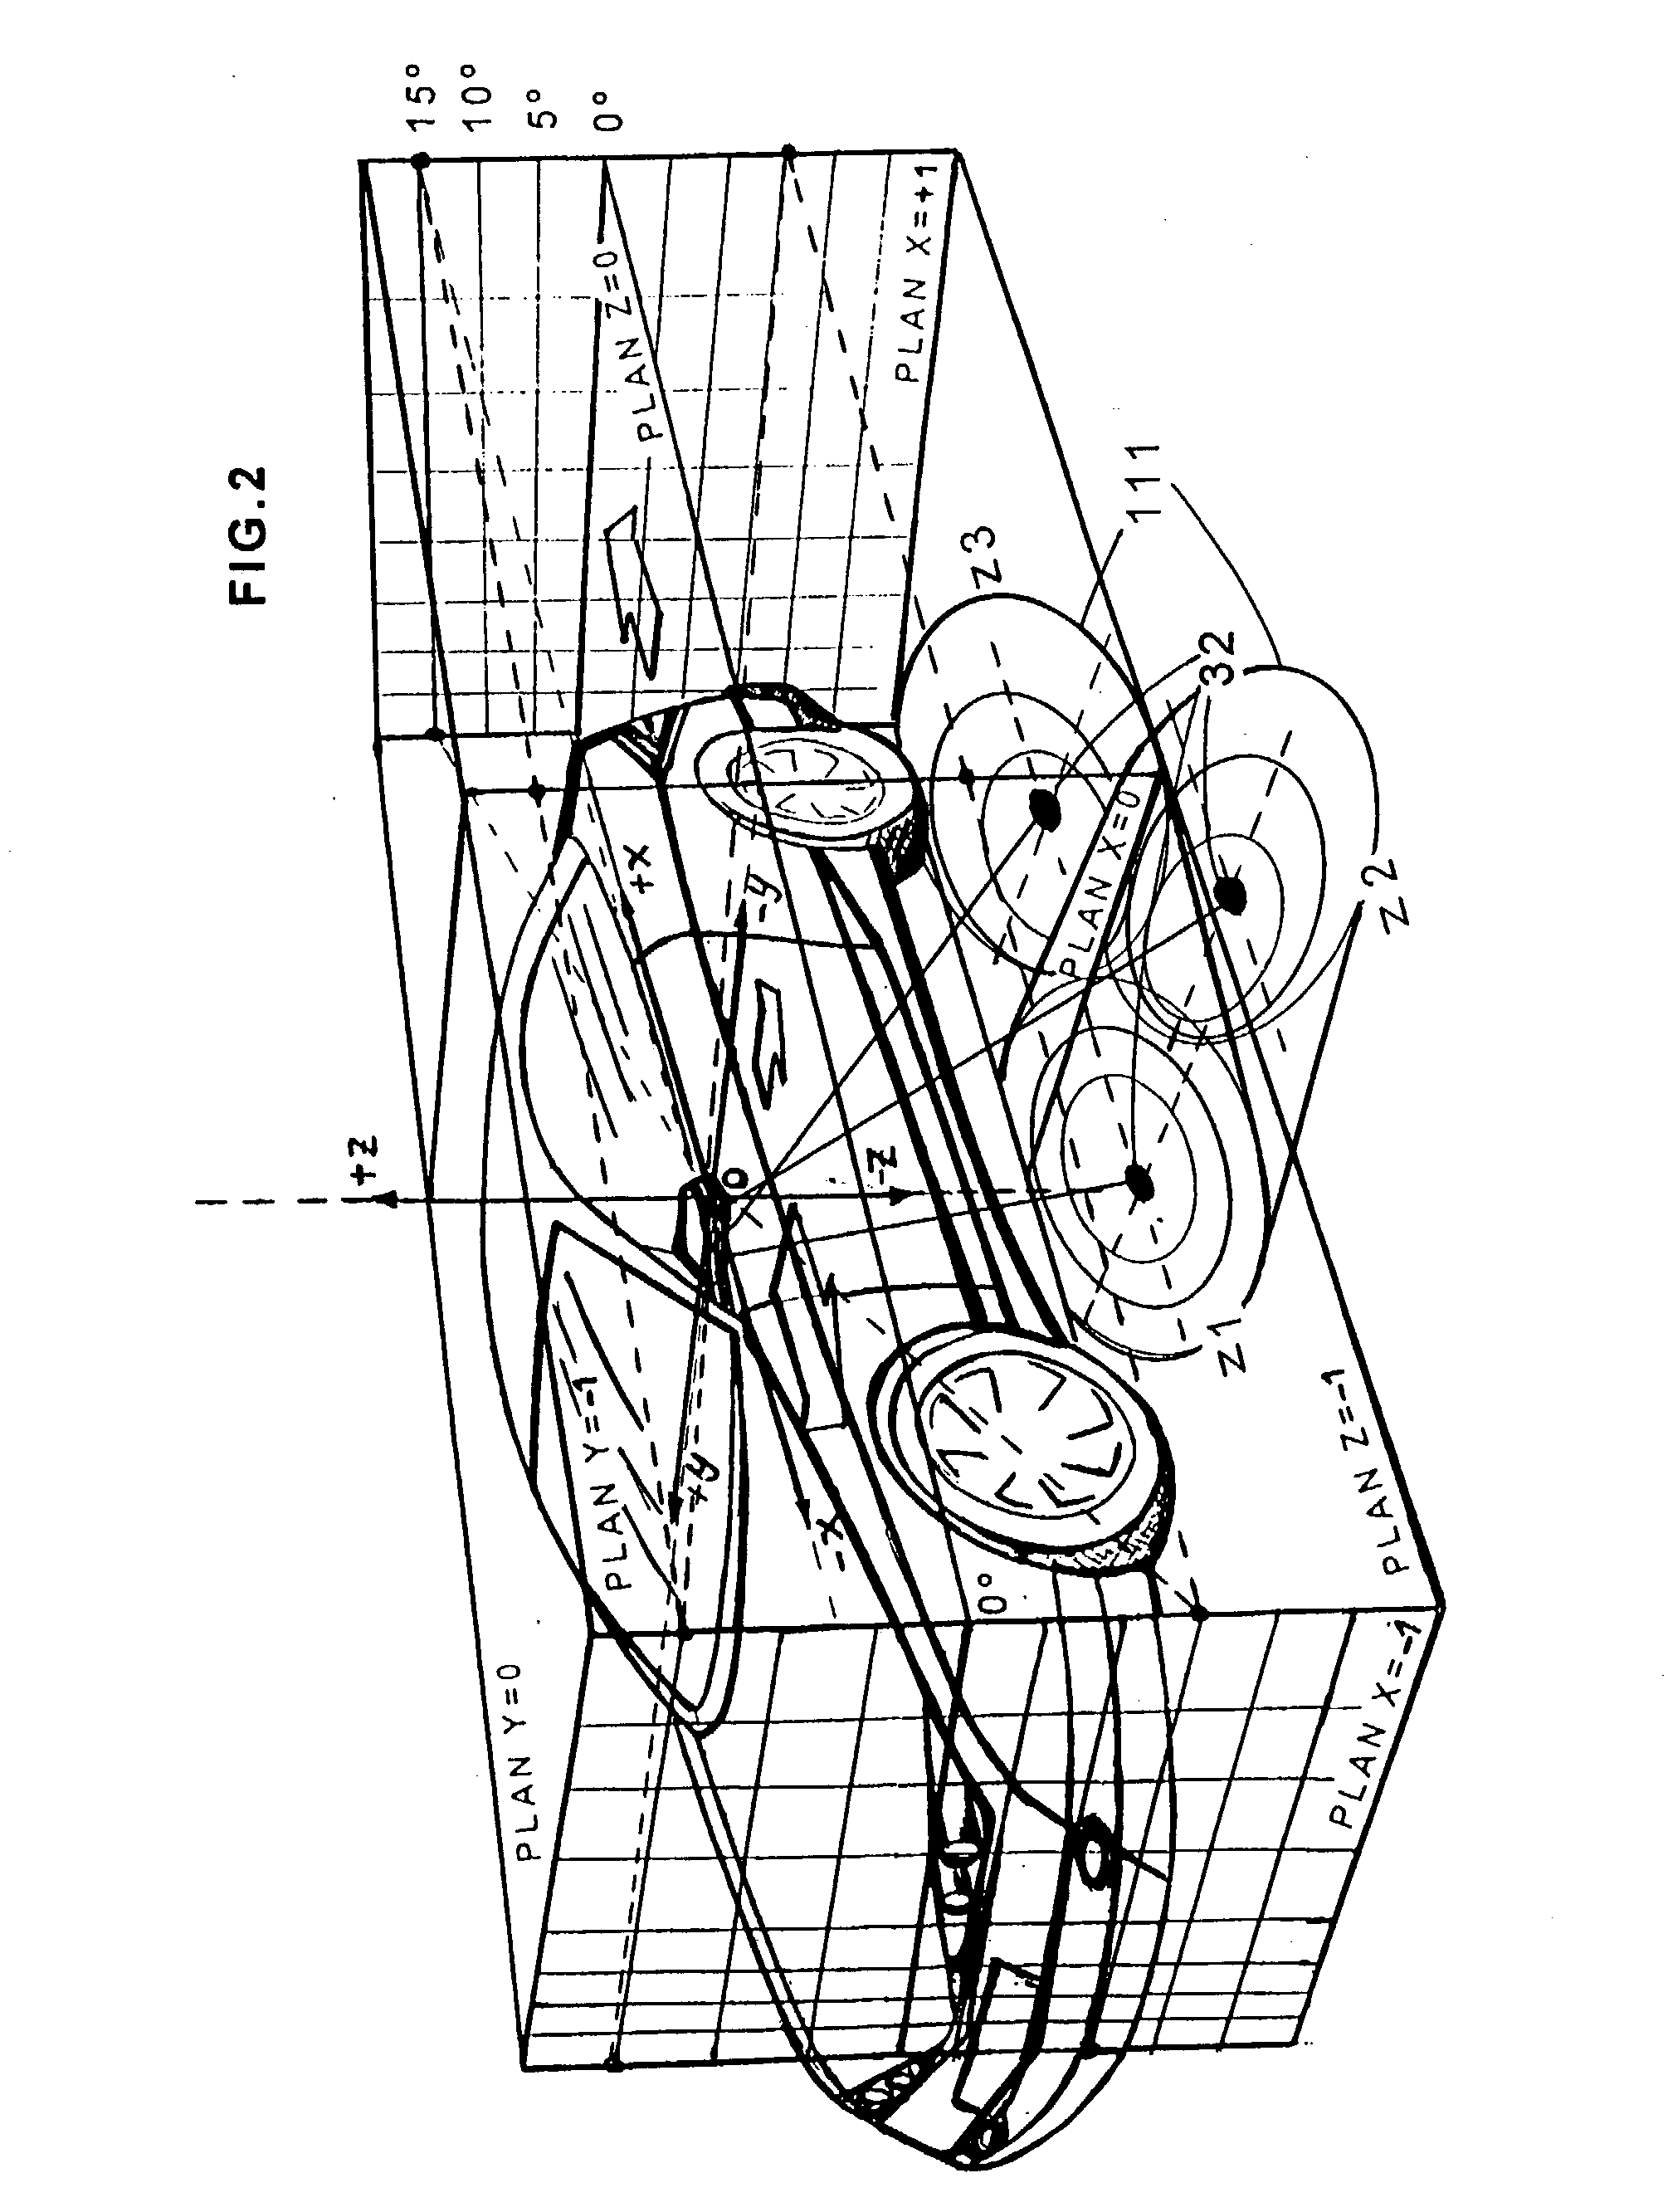 Rear-view mirror with multiple interchangeable signals for vehicles with two, three, four or more wheels